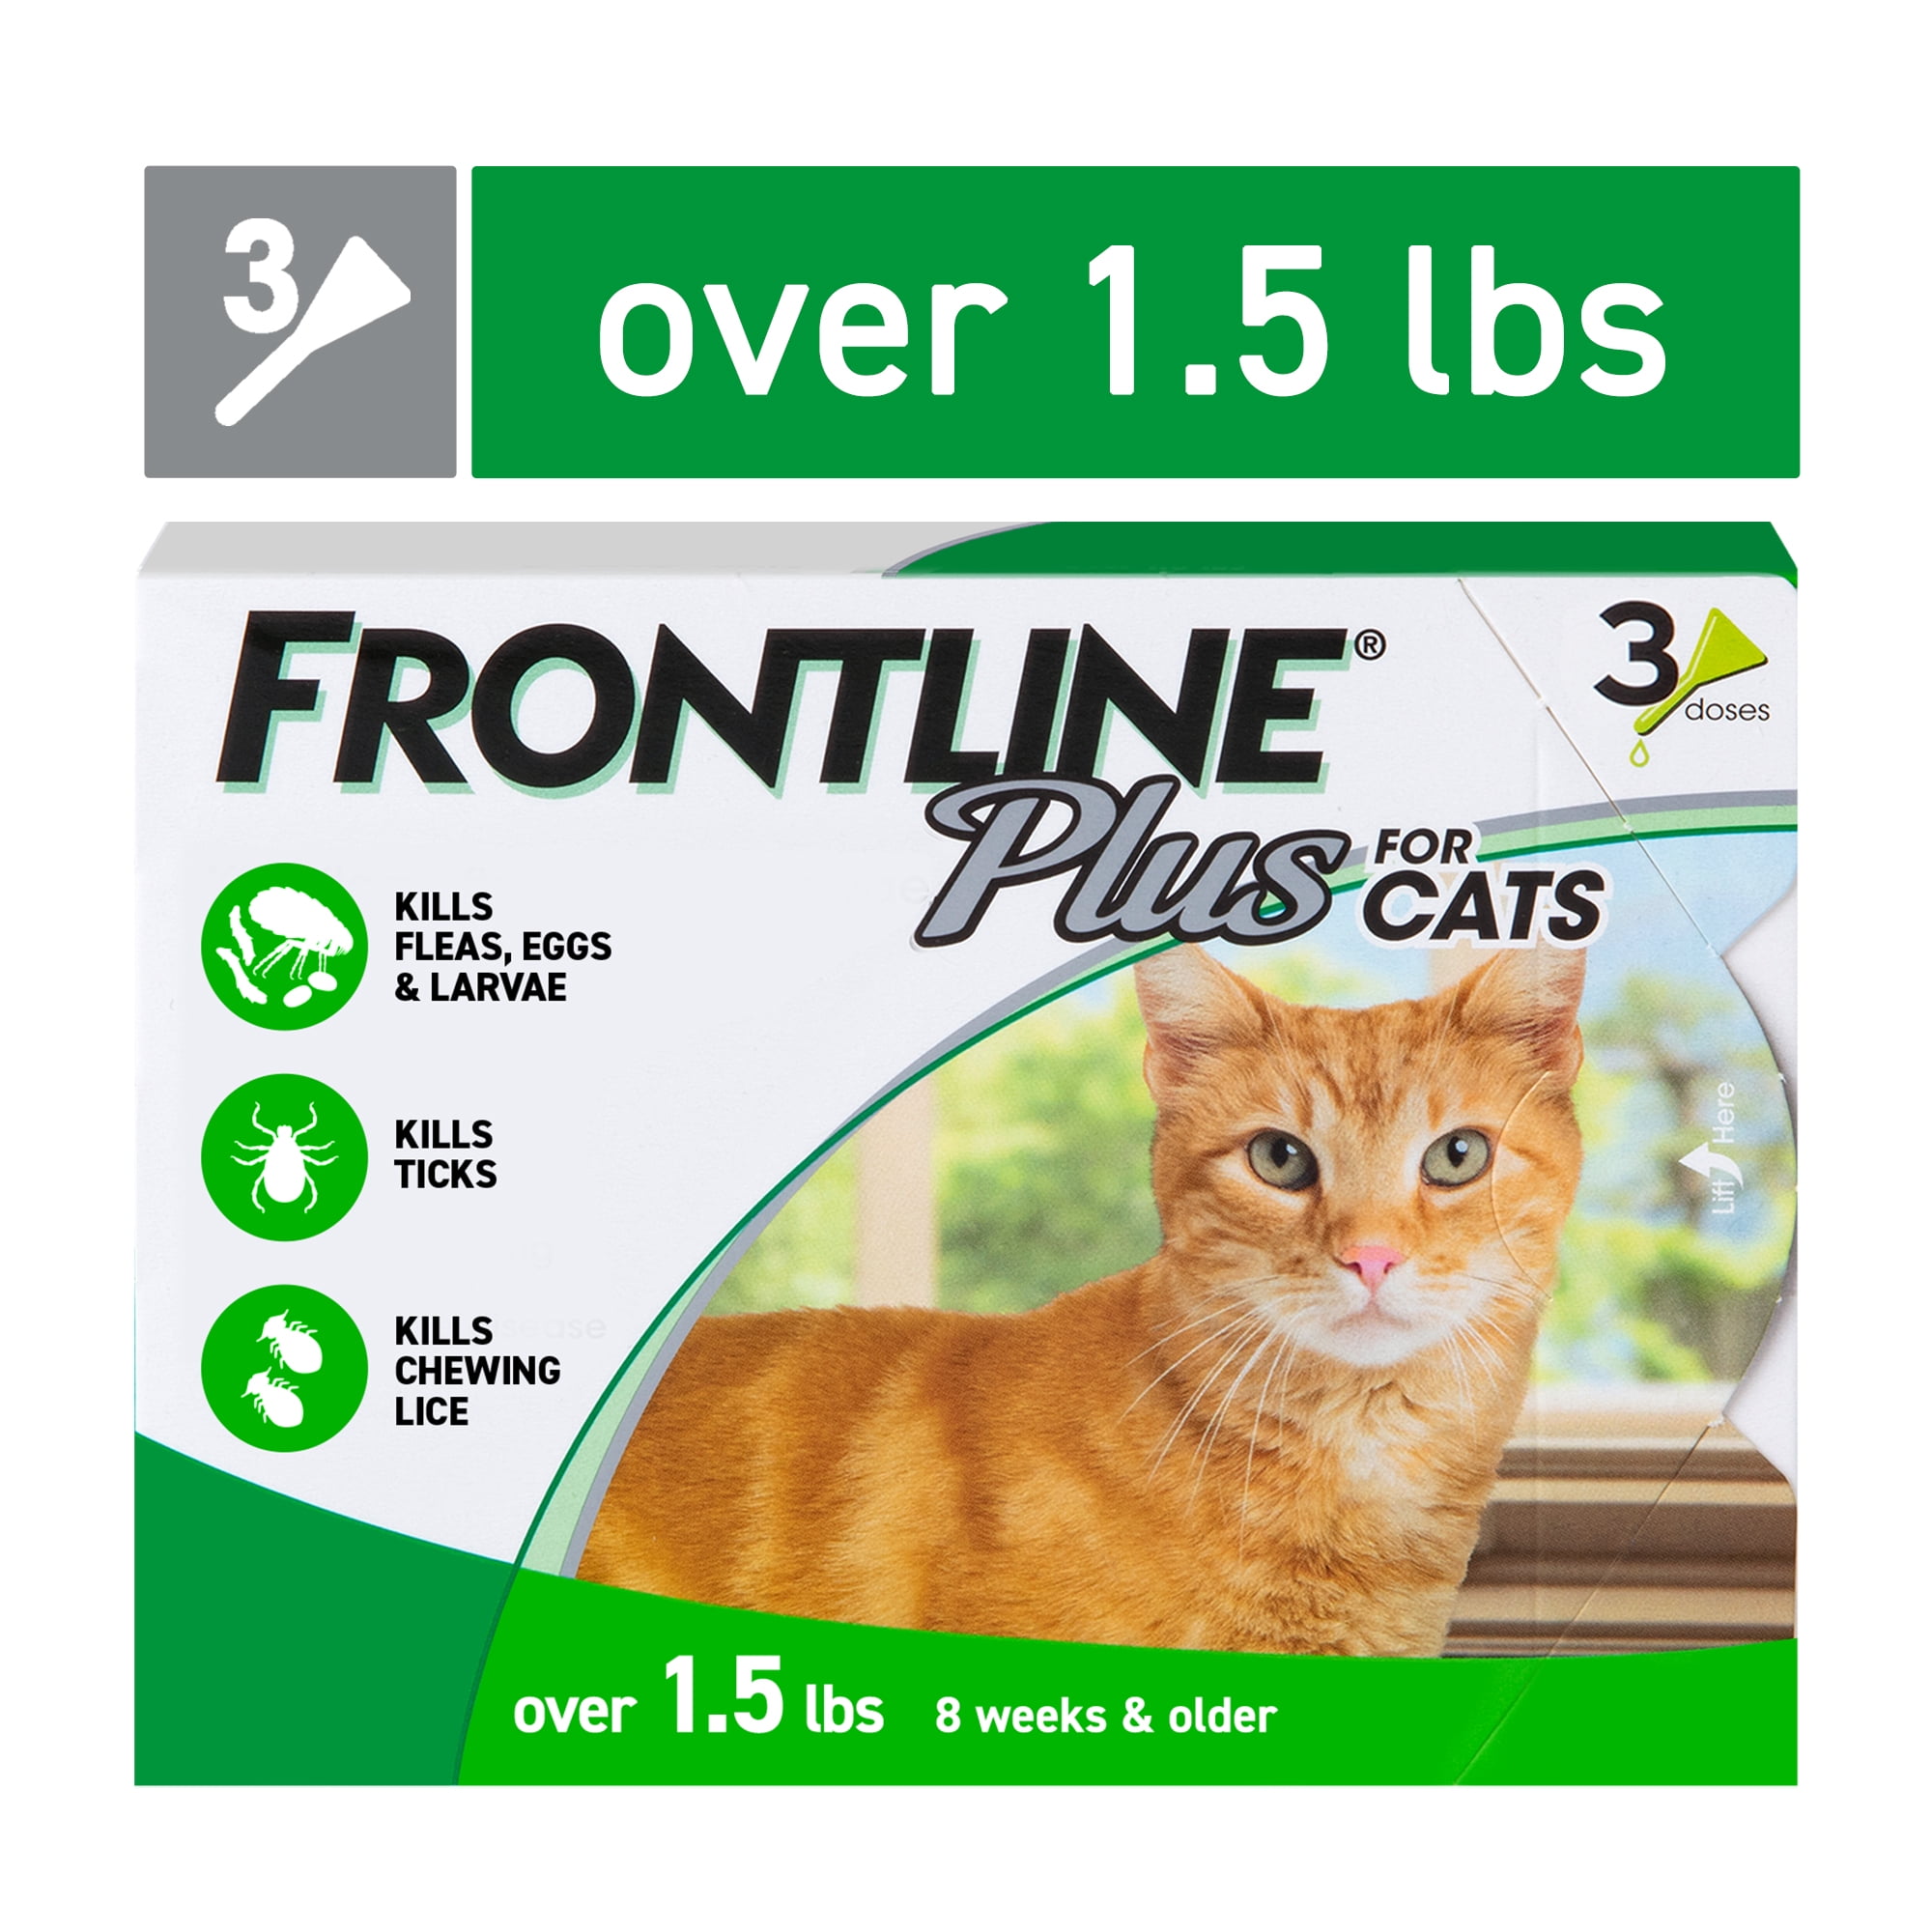 FRONTLINE® Spray  Flea treatment for puppies and kittens